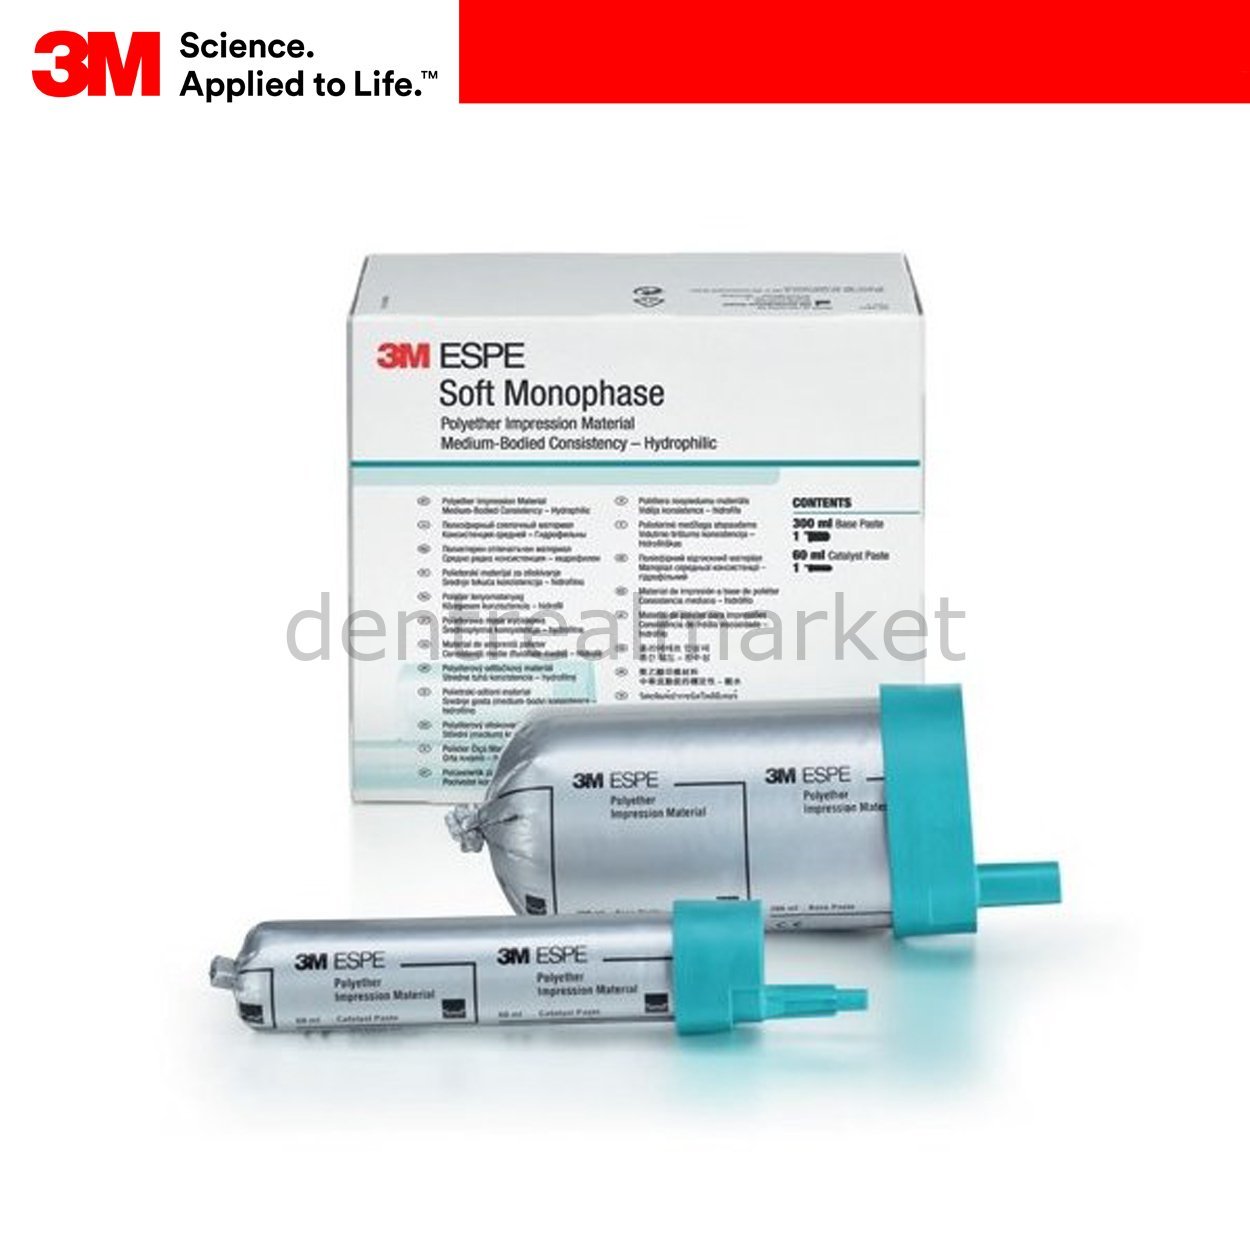 DentrealStore - 3M Soft Monophase Polyether Impression Material